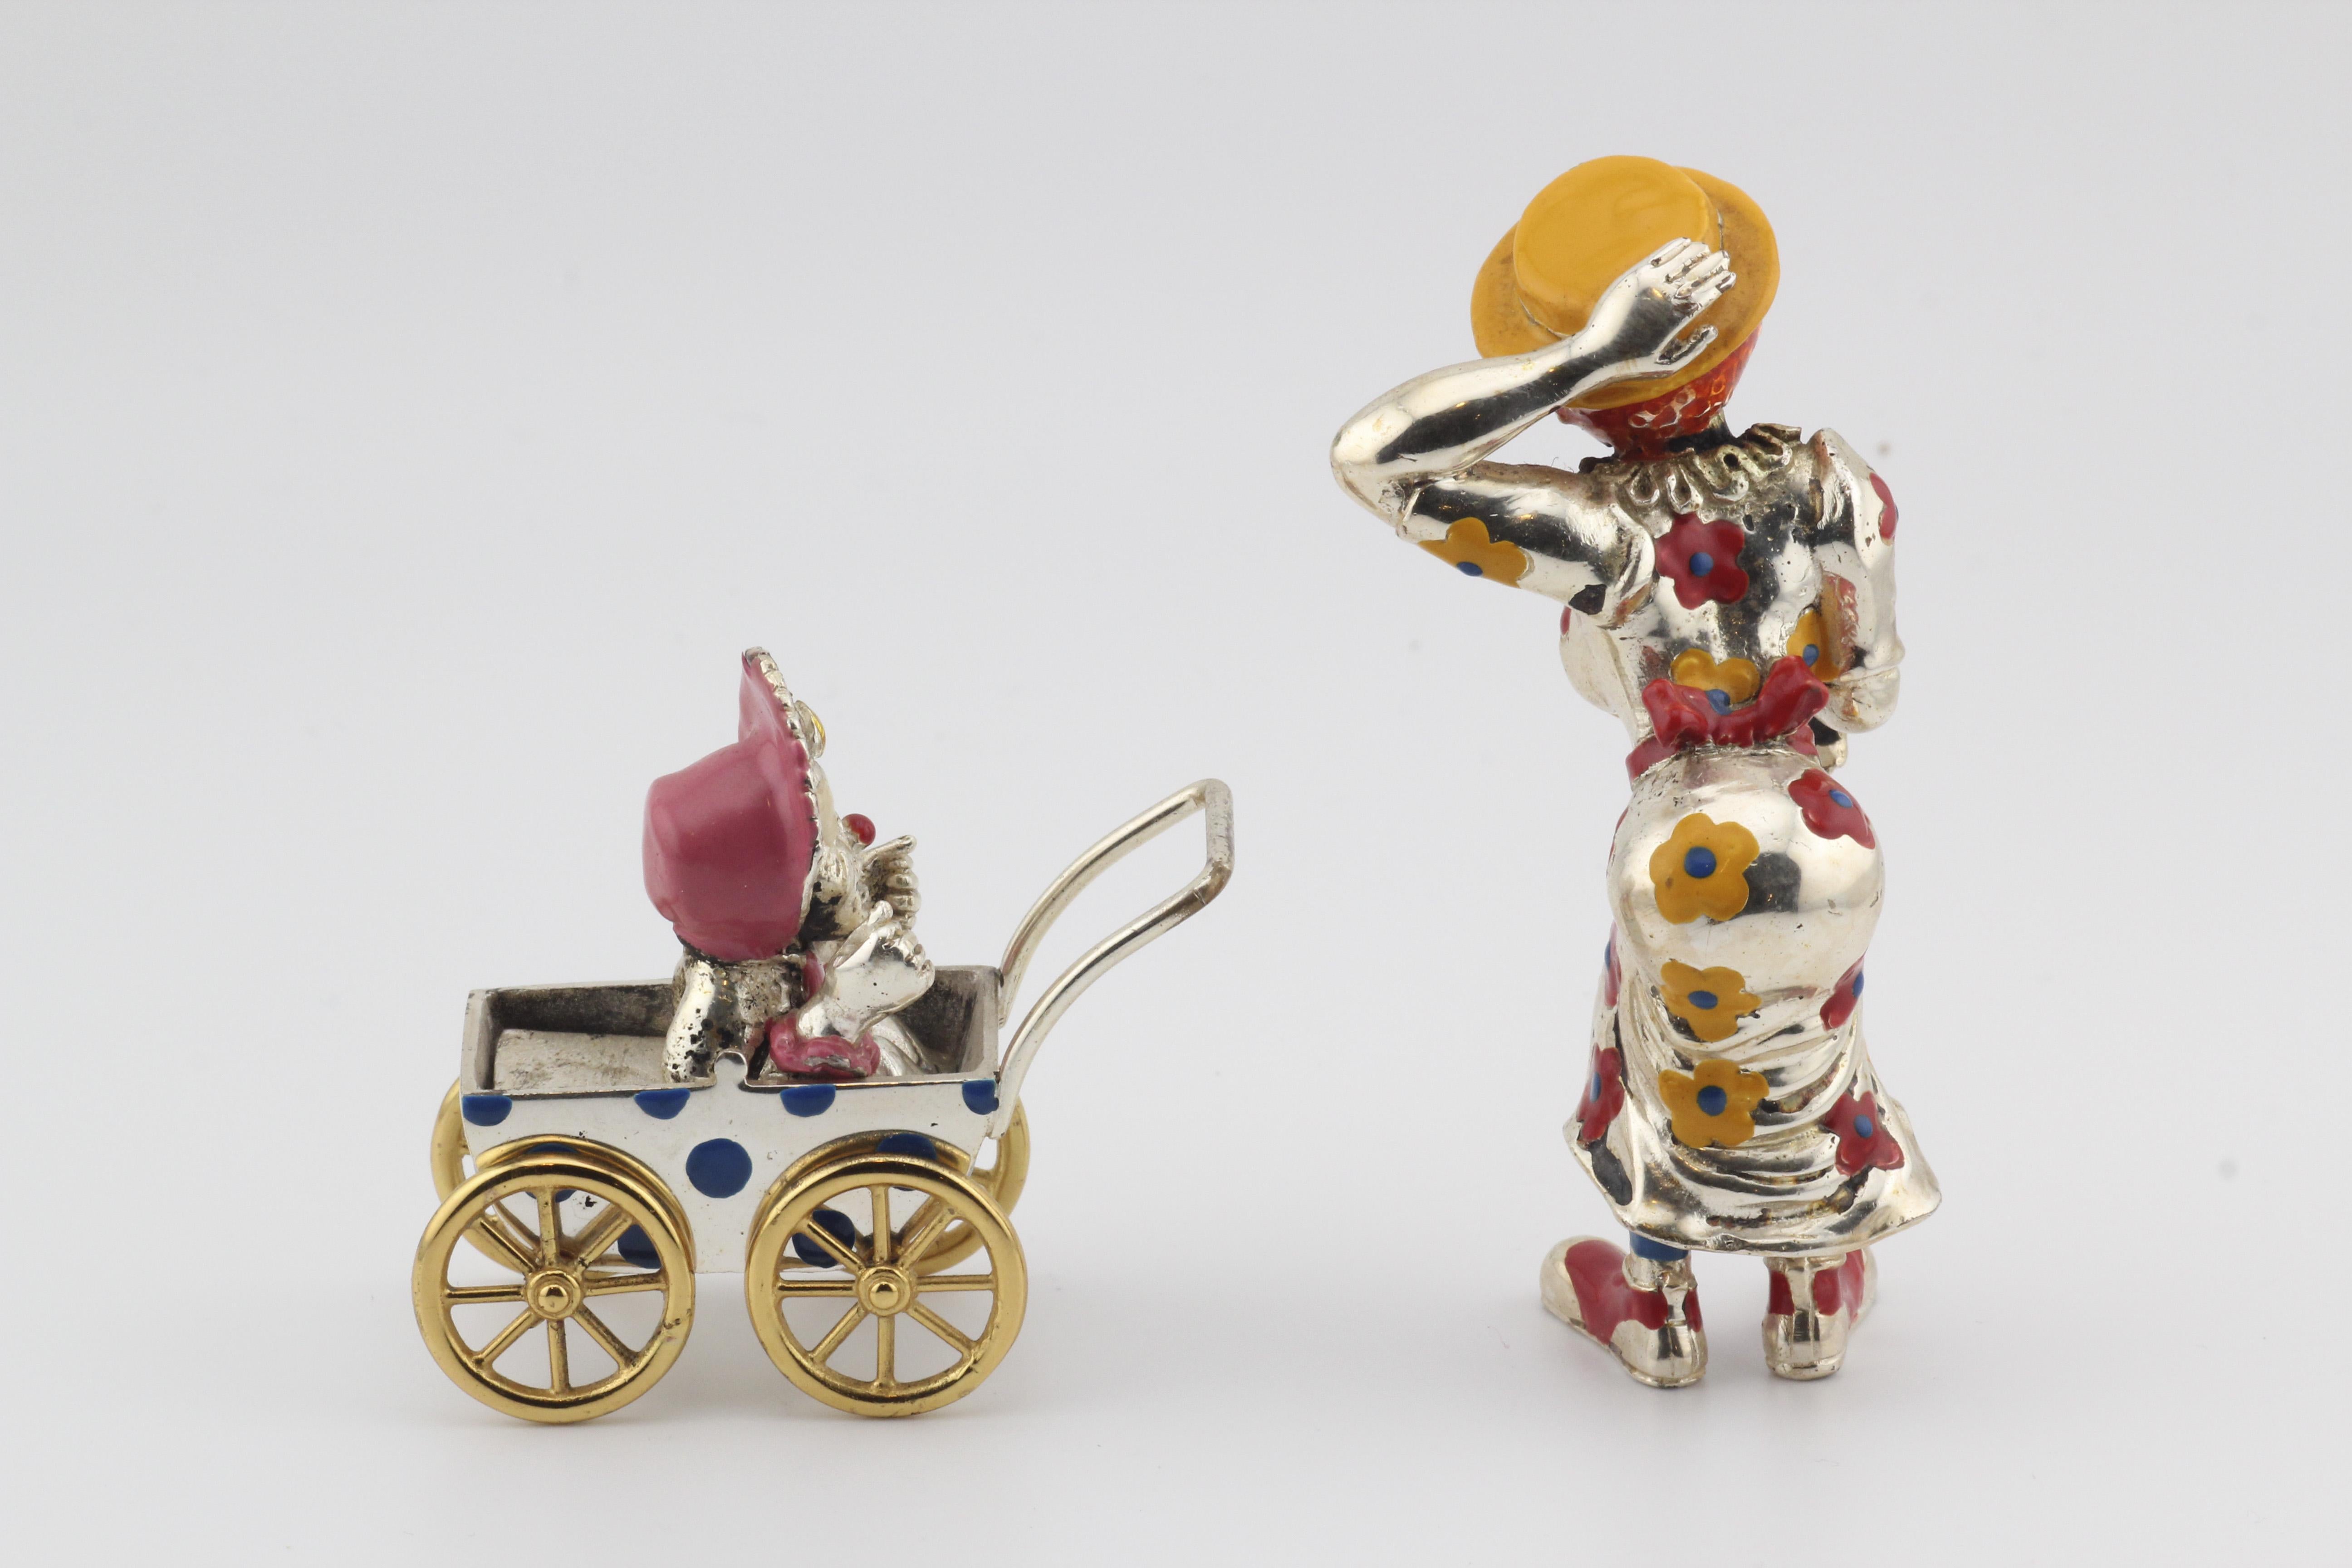 Step into the enchanting world of whimsy and craftsmanship with this Tiffany & Co. Silver & Enamel Circus Clown Mother & Baby in Carriage Figurine. Meticulously crafted, this figurine is a testament to Tiffany & Co.'s legacy of creating exceptional